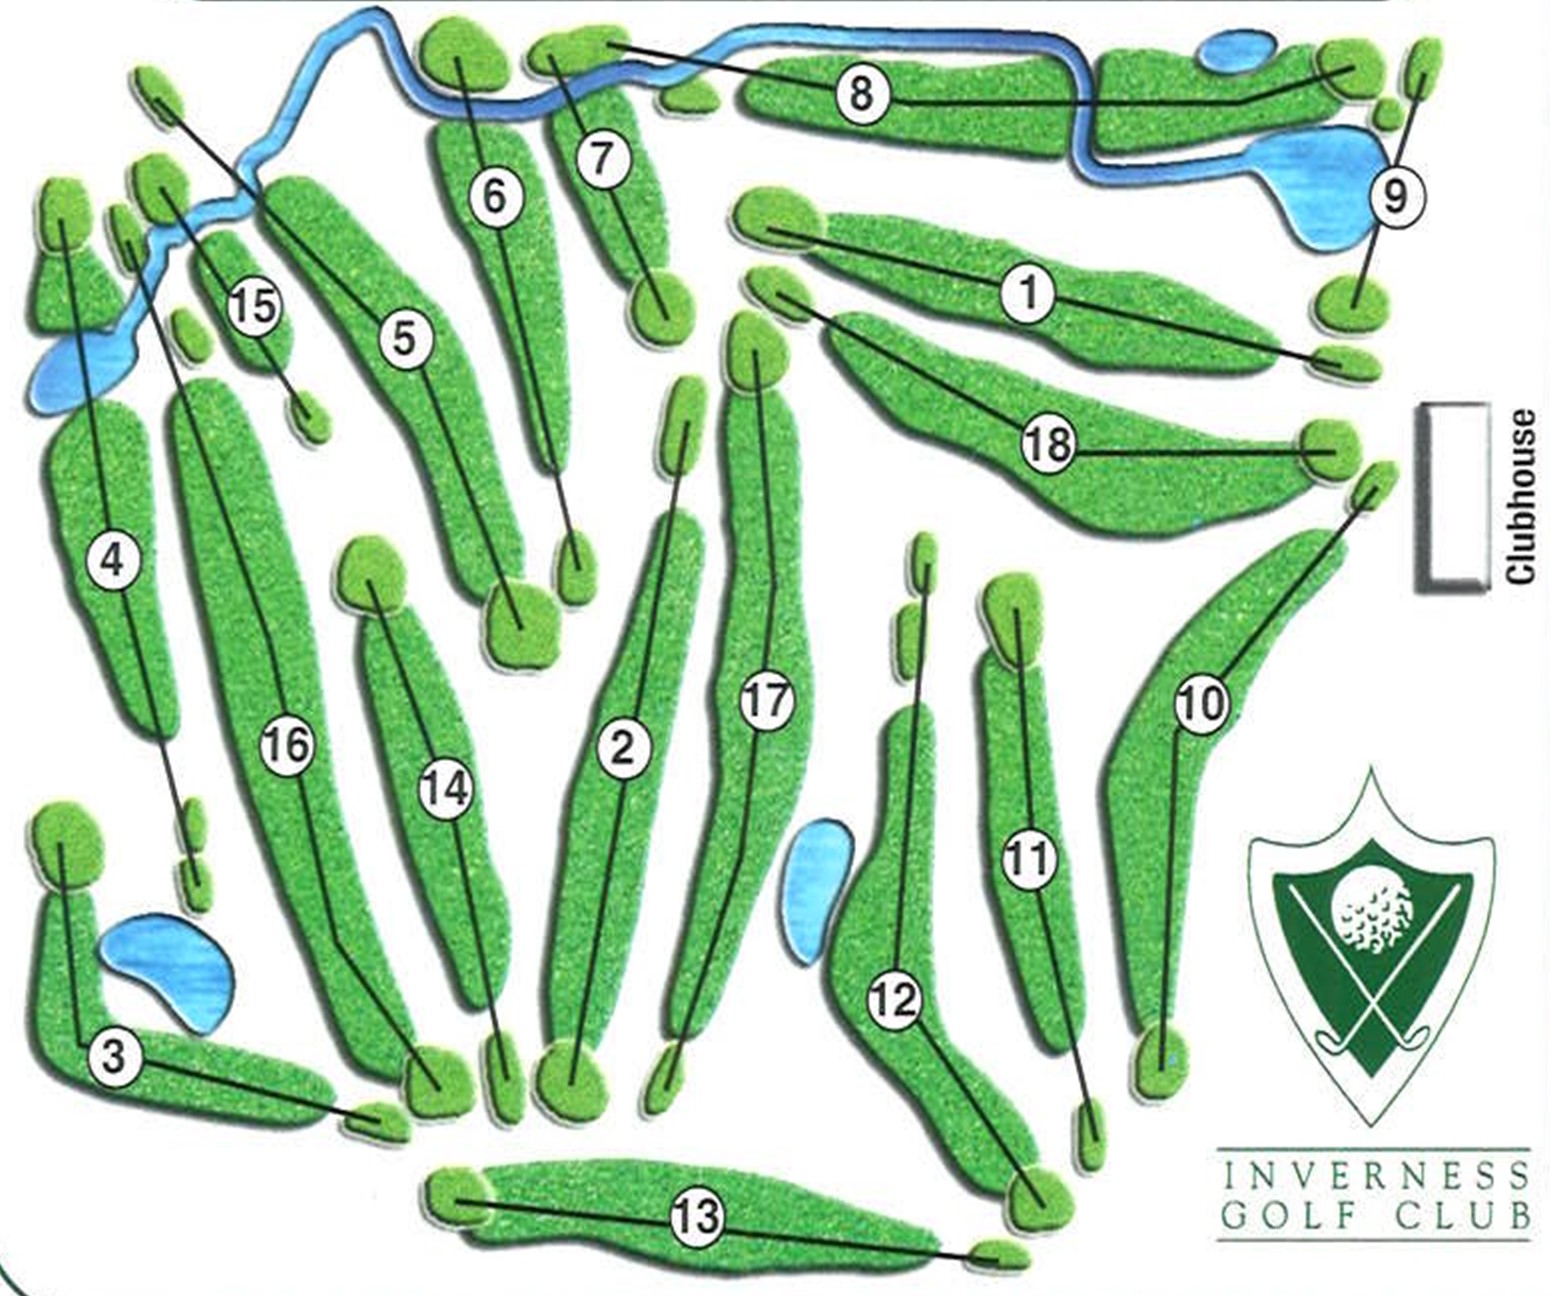 Inverness Golf Club Course Map